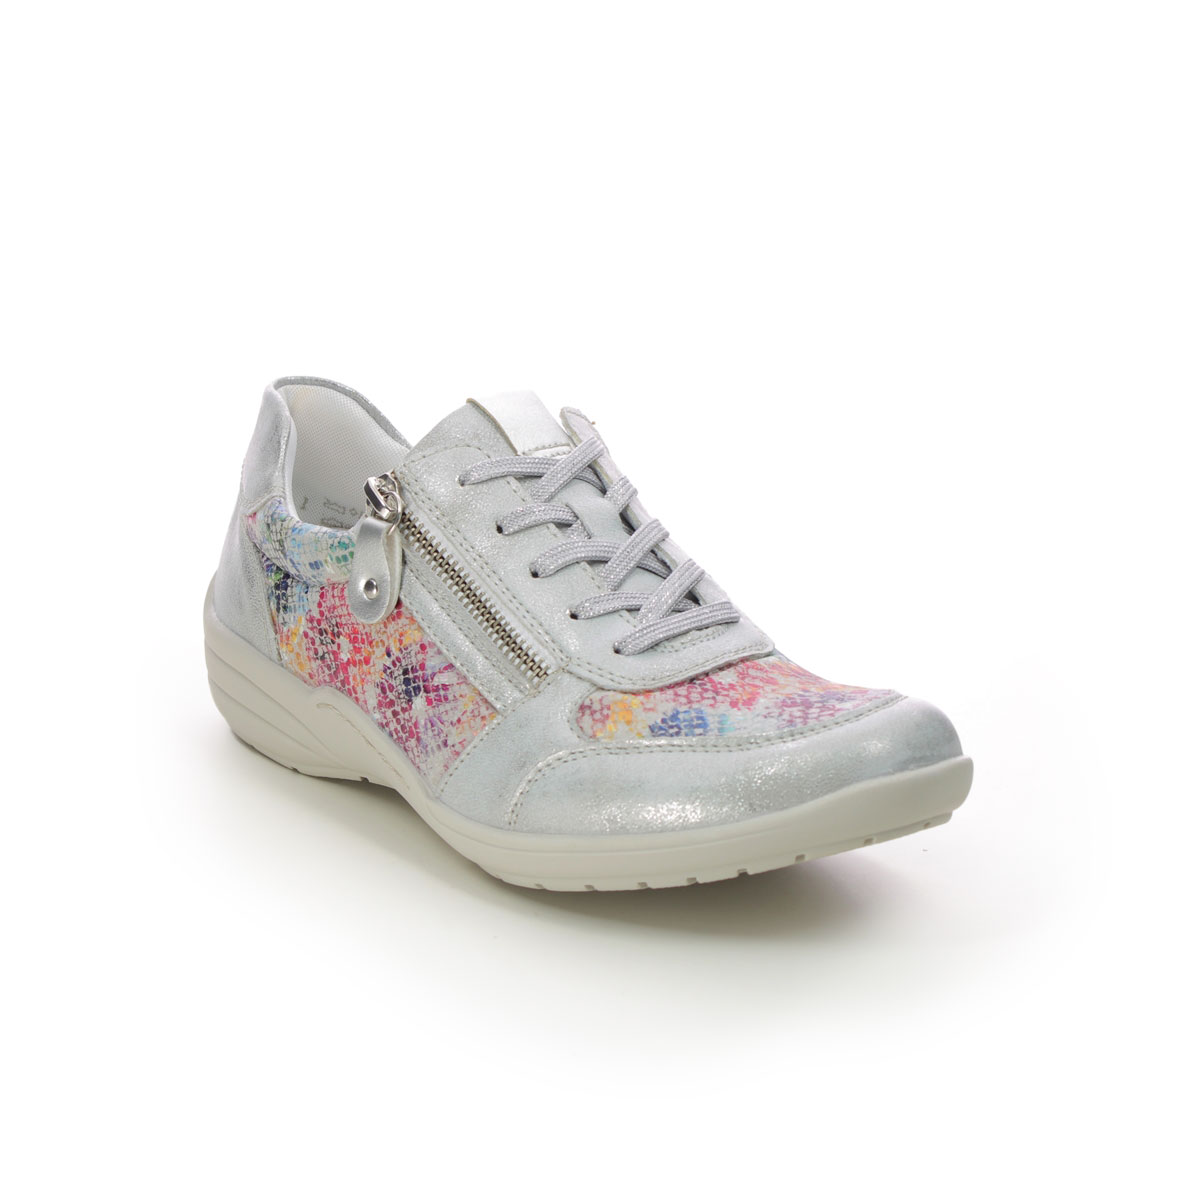 Remonte Bertazip Silver Floral Womens Lacing Shoes R7637-40 In Size 39 In Plain Silver Floral